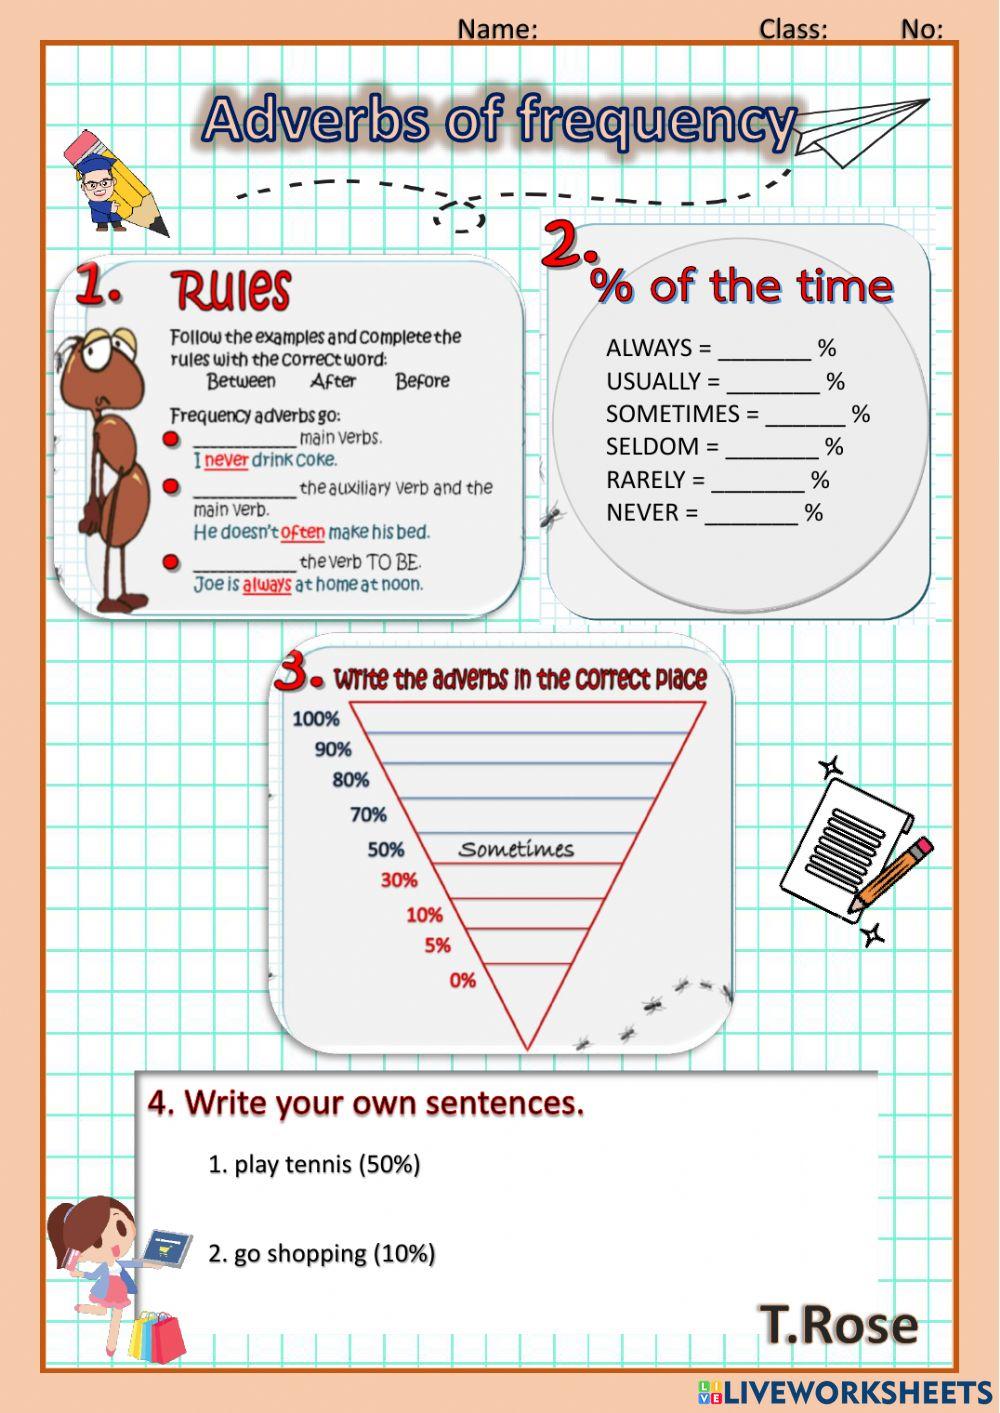 Adverbs of frequency with T.Rose